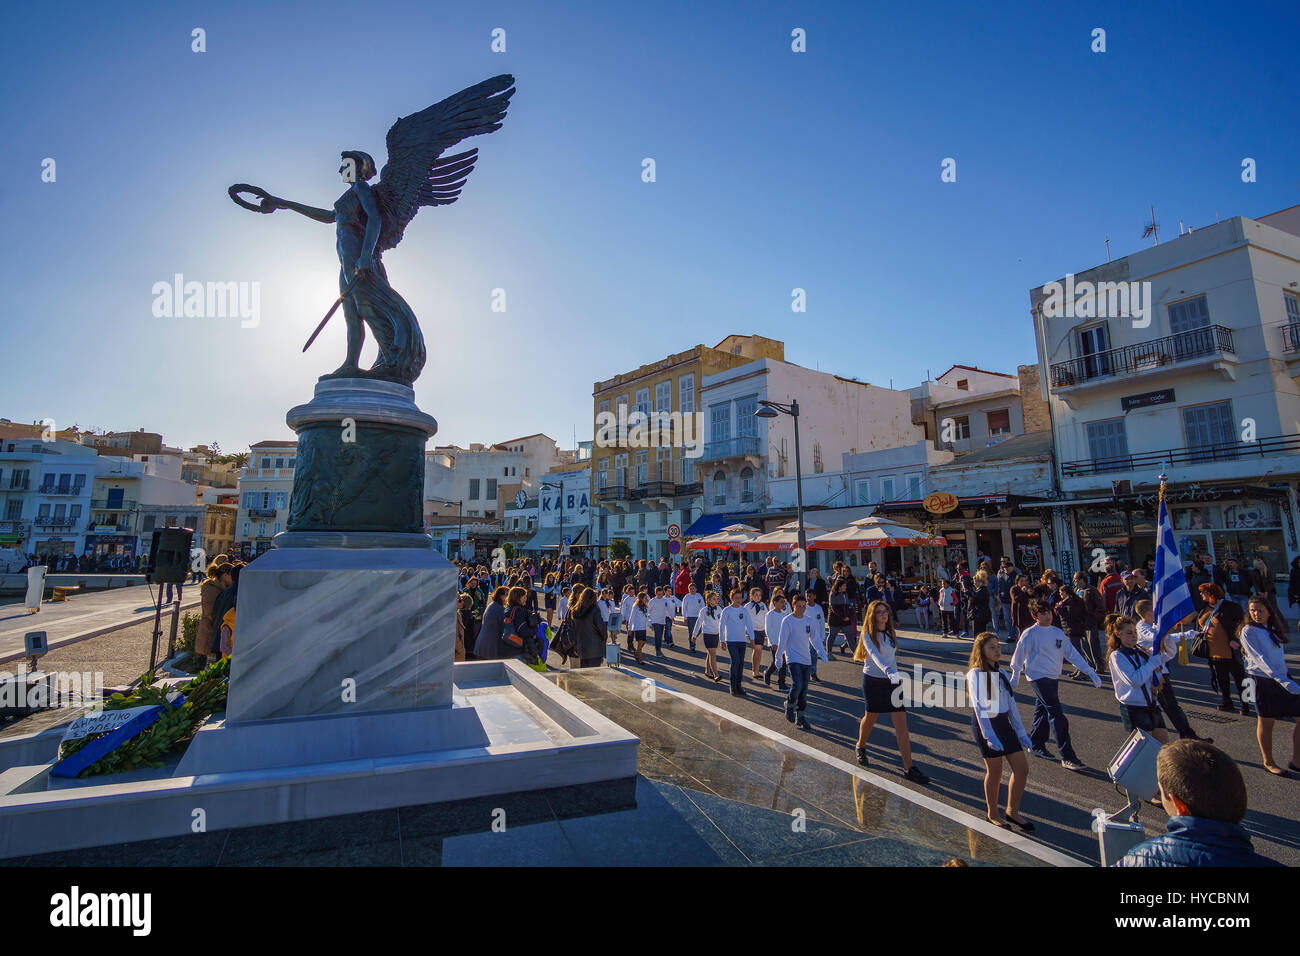 The Greek National Anniversary and a major religious holiday with school and military parades in Syros island, Cyclades - Greece Stock Photo